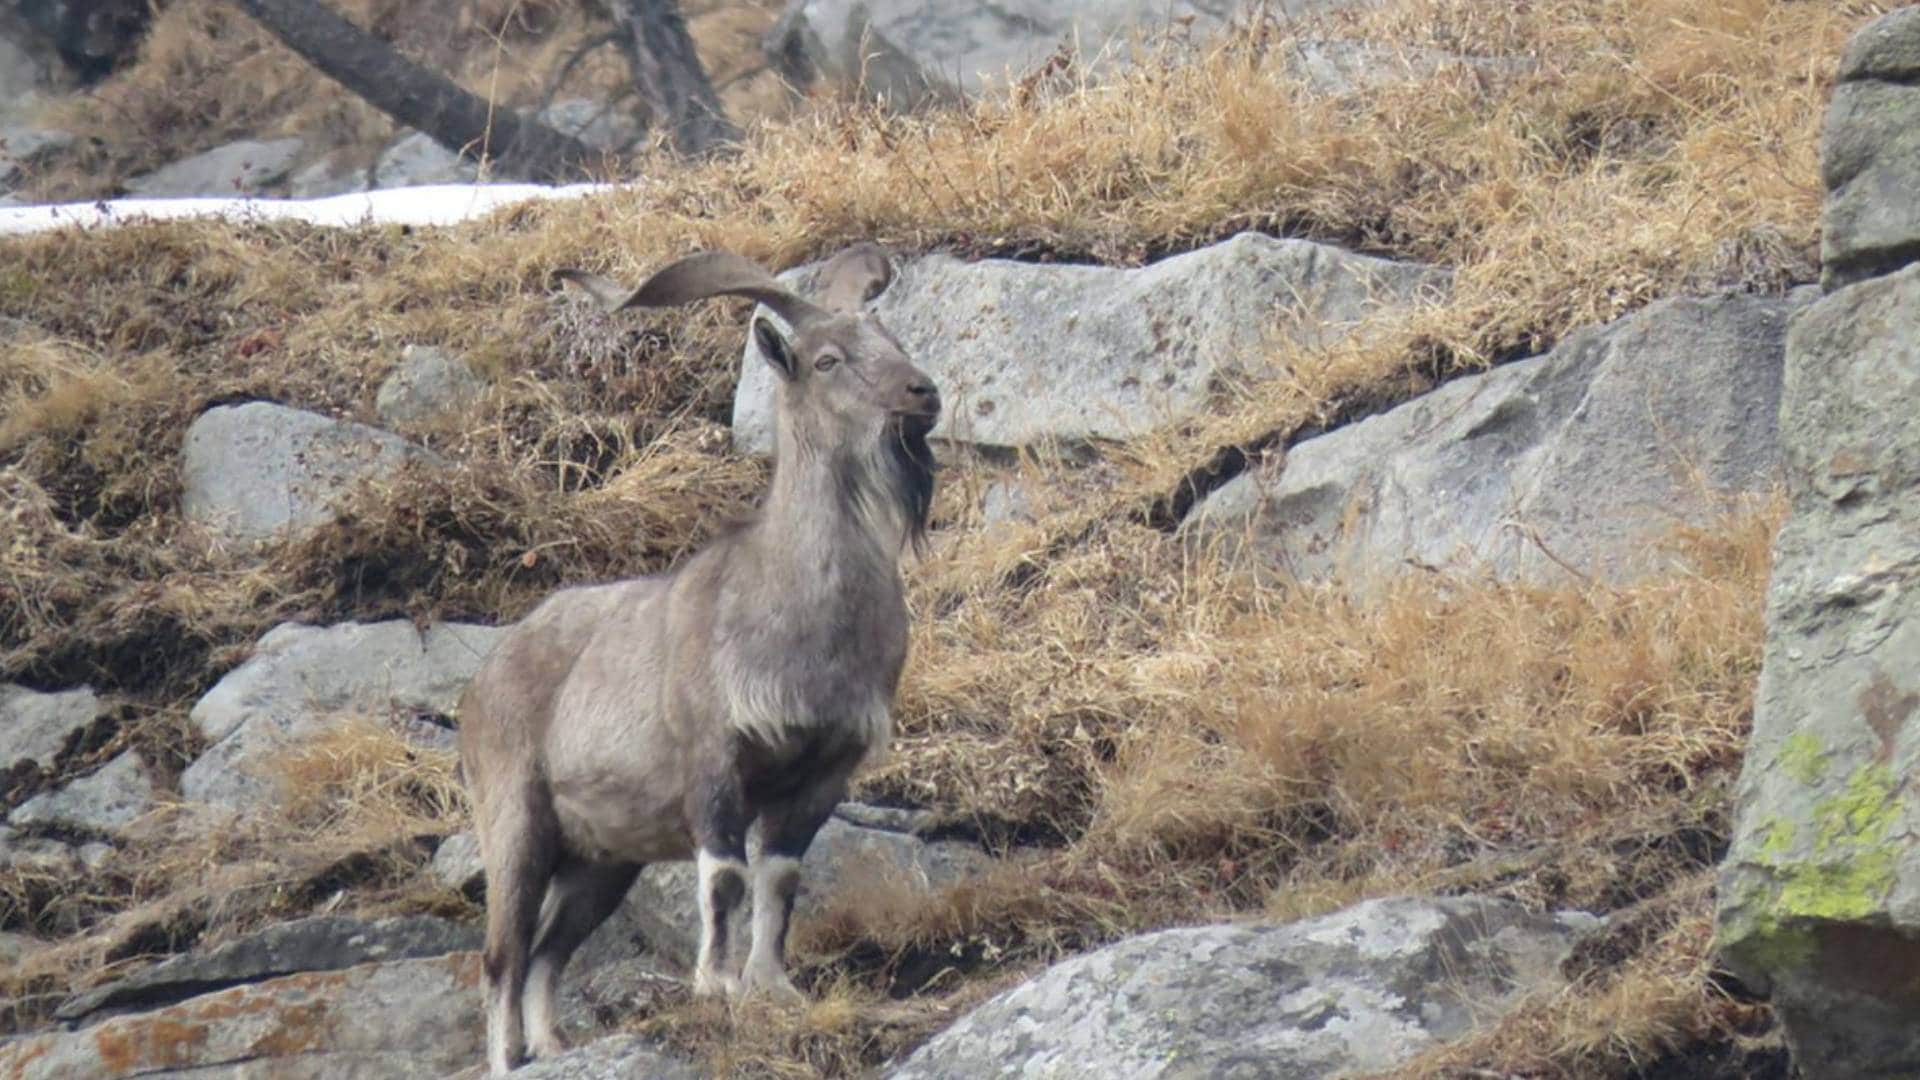 Markhor struggles to survive in Kashmir as its Hirapora habitat is overgrazed, fragmented by roads and power lines